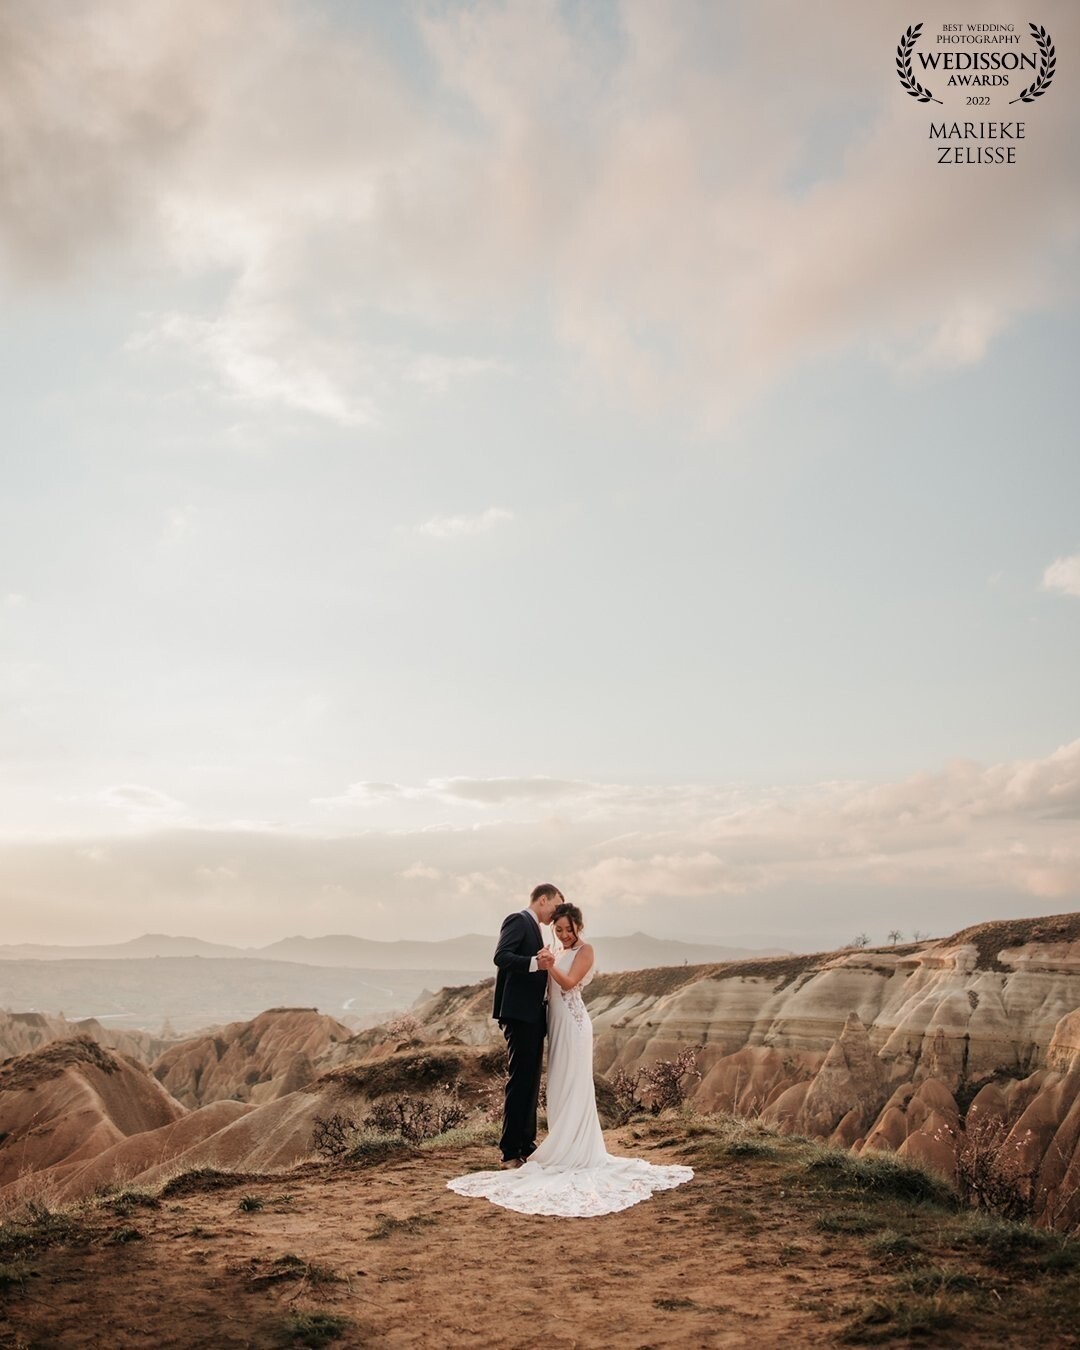 I love a good golden hour! I always say, if you are lucky on your wedding day and you have a good sundown definitely we have to sneak out for some good pictures!